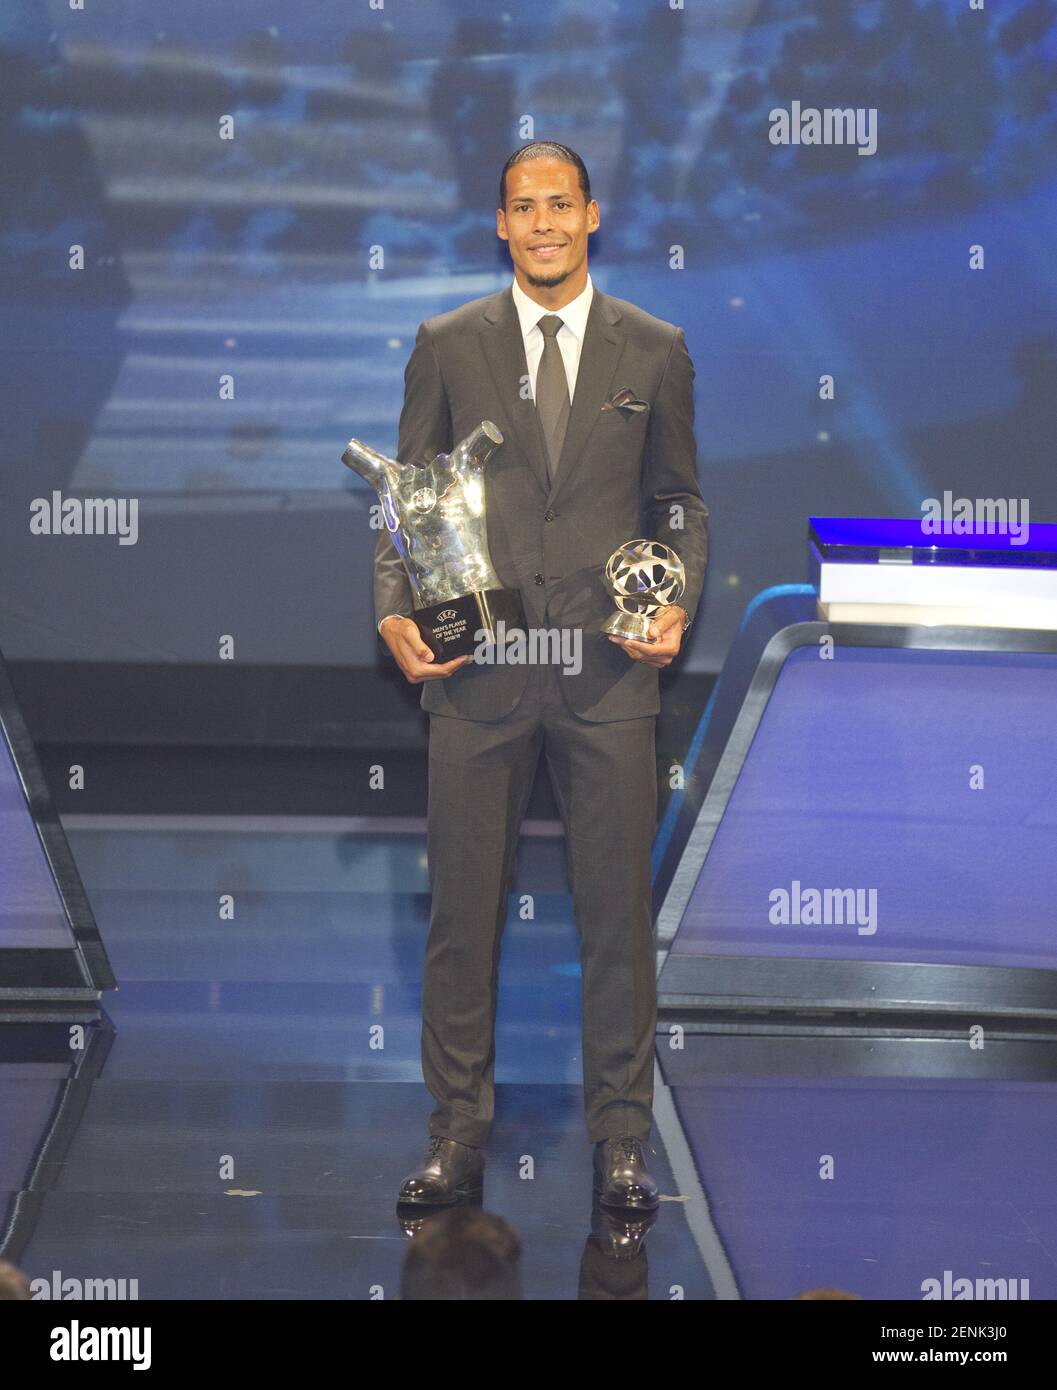 Monaco, Monte Carlo - August 29, 2019: UEFA Champions League Group Stage Draw, Season Kick Off 2019-2020 with Dutch Soccer player Virgil van Dijk of Liverpool winning the Men's player of the year 2018/19 Award. (Photo by Mandoga Media/Sipa USA) Stock Photo